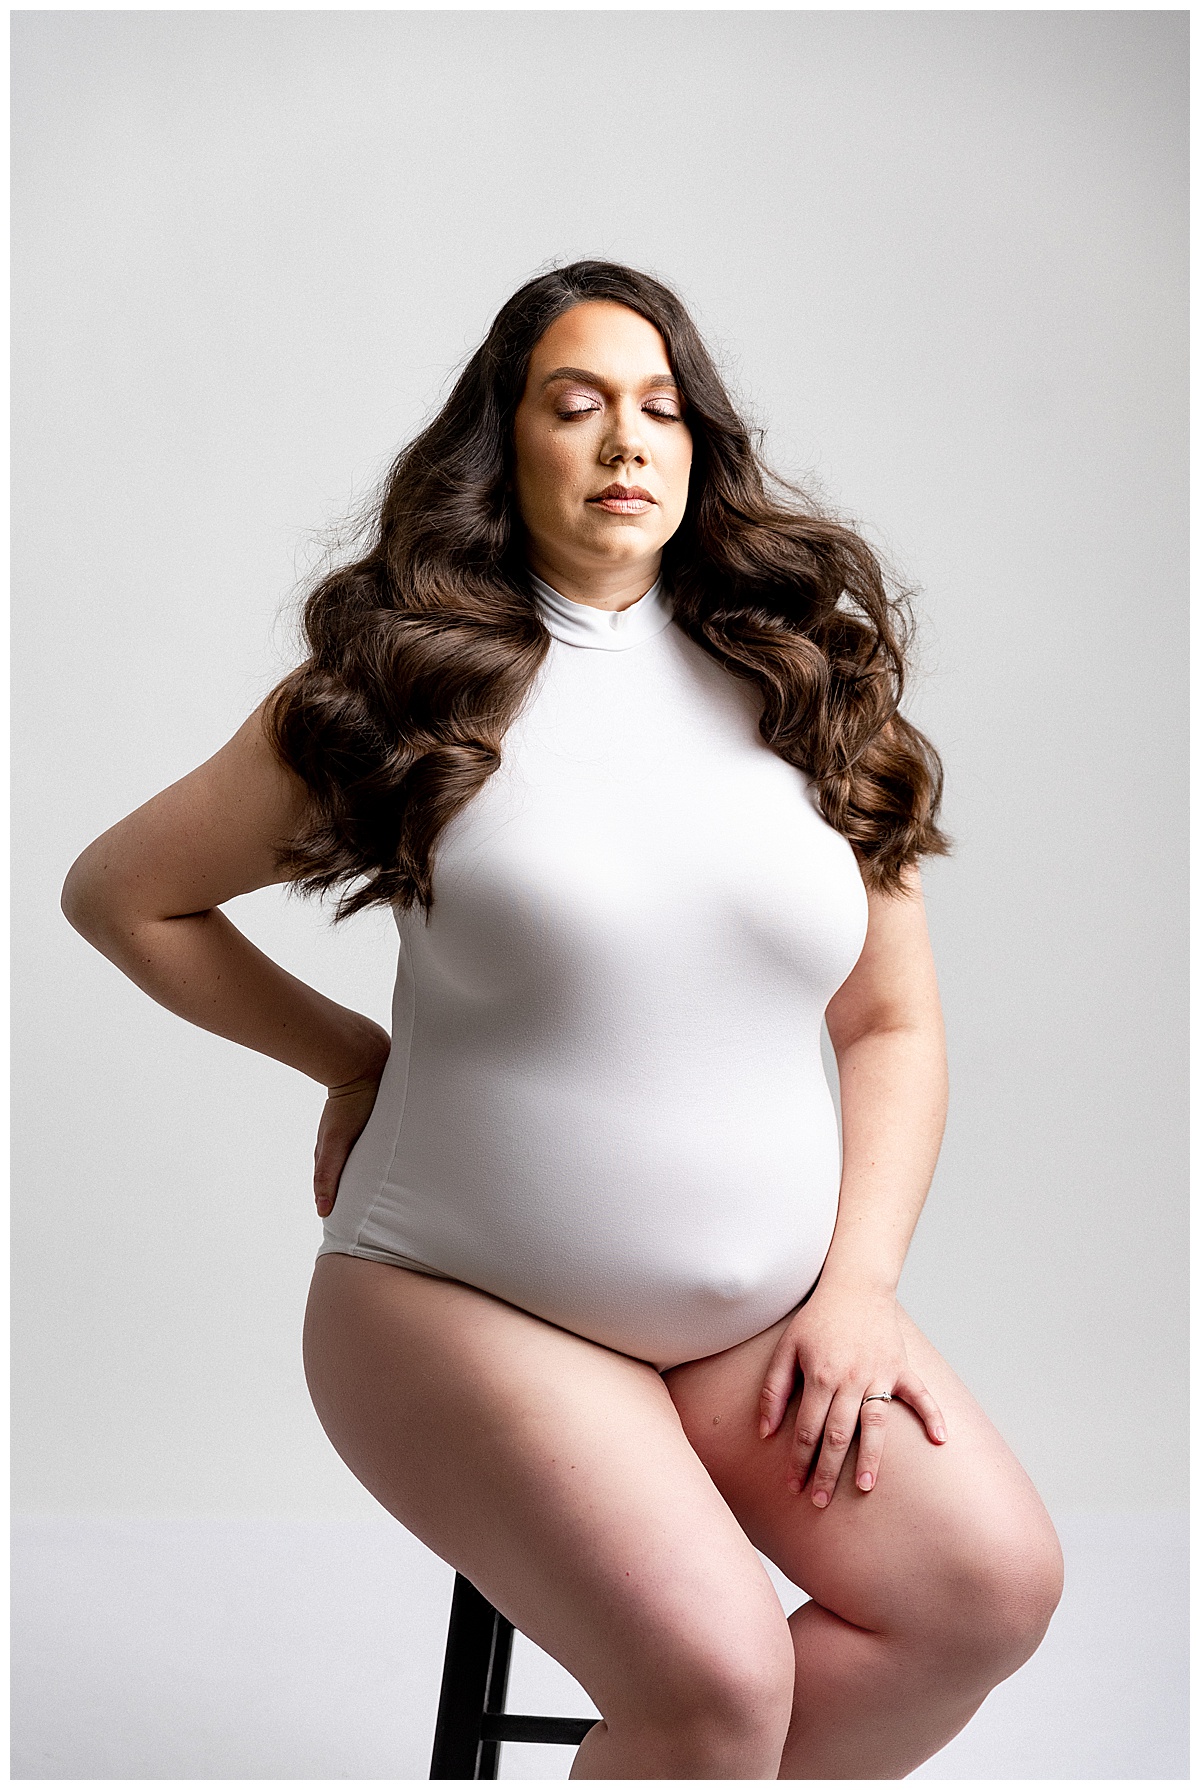 Woman sits on a stool in a white bodysuit for her Full Fine Art Maternity Session